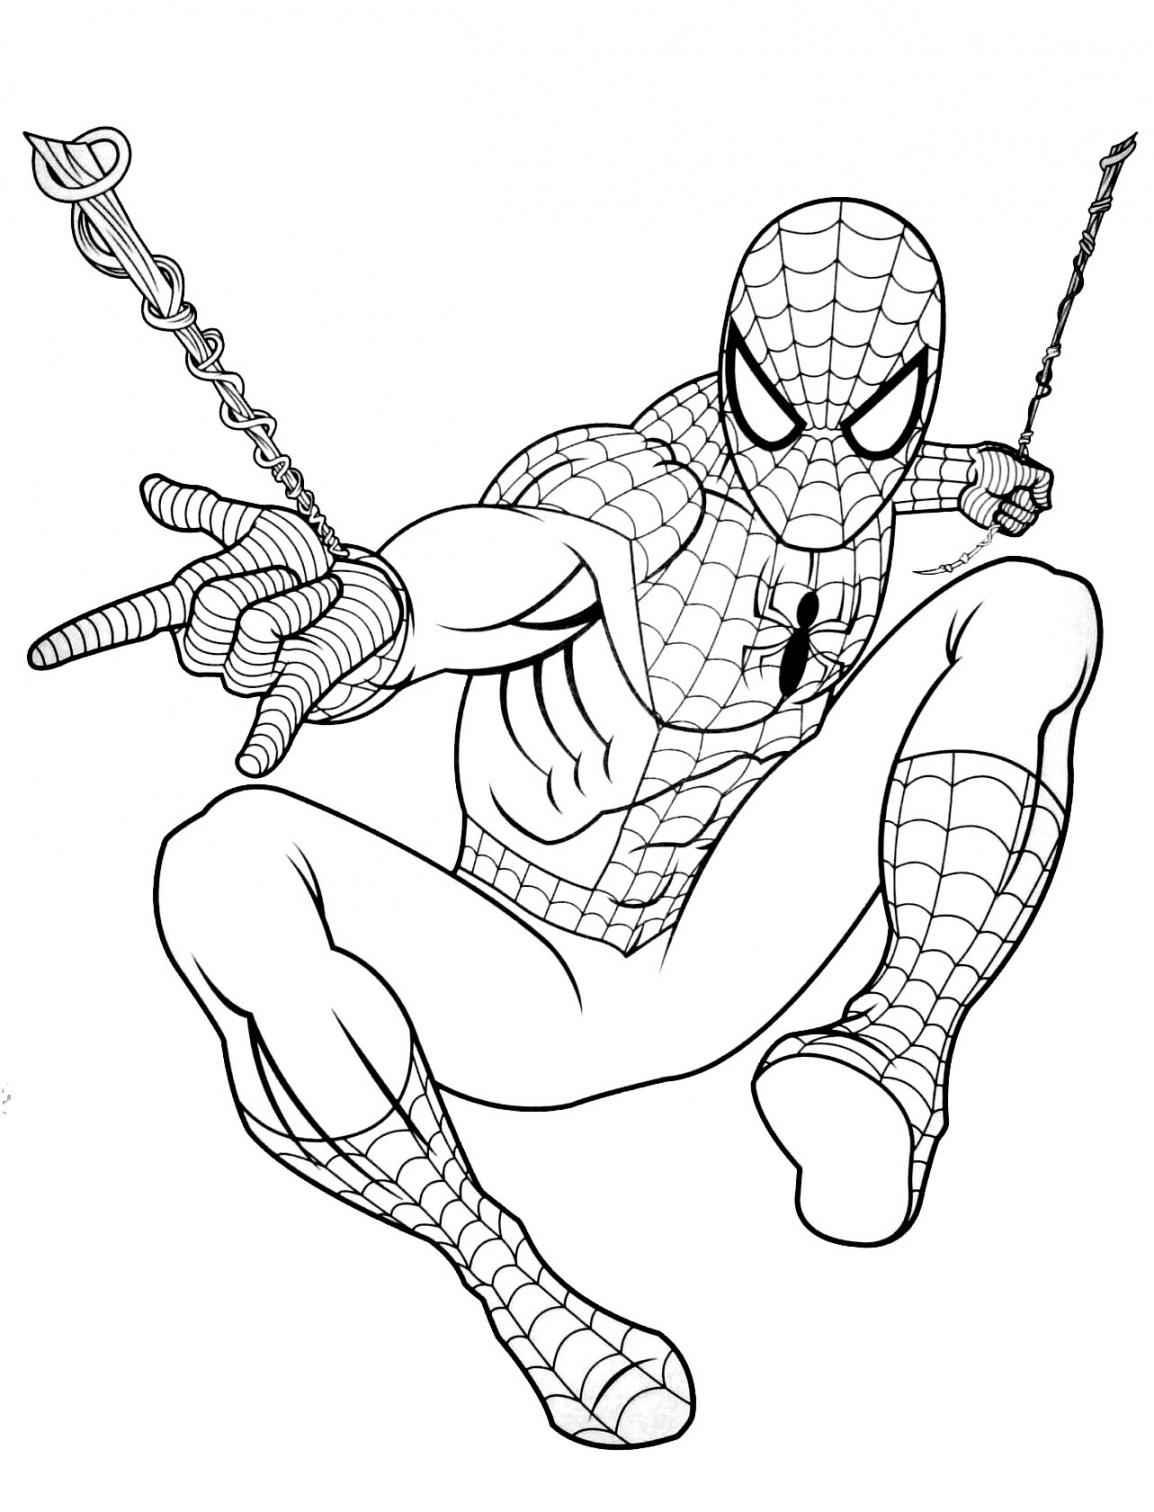 Free Spiderman drawing to print and color - Spiderman Kids  - FREE Printables - Free Printable Spiderman Coloring Pages